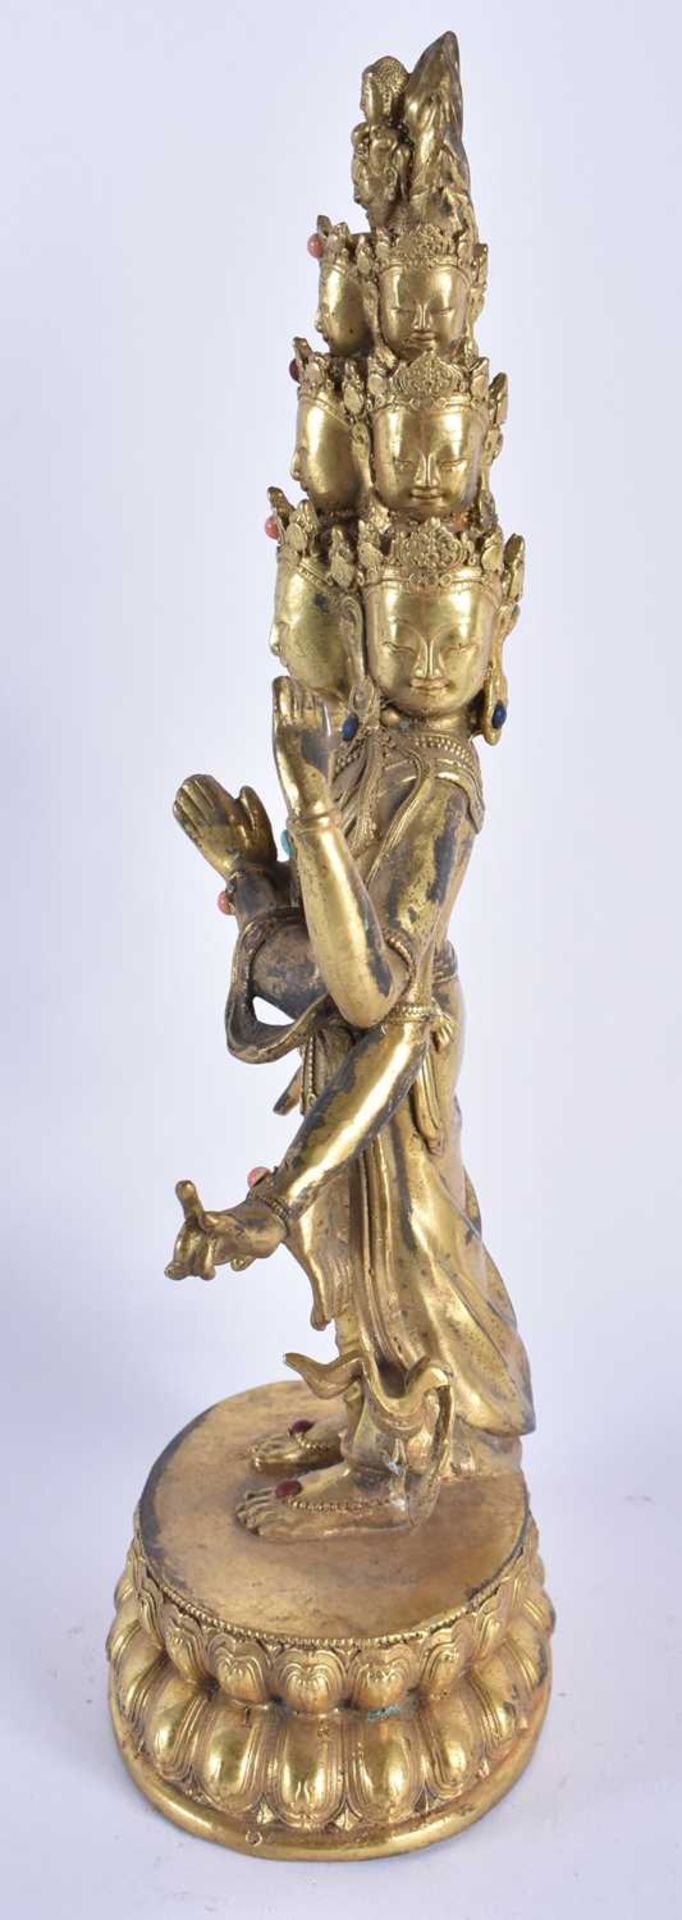 A LARGE CHINESE TIBETAN JEWELLED GILT BRONZE FIGURE OF A STANDING BUDDHA 20th Century. 28 cm high. - Image 6 of 8